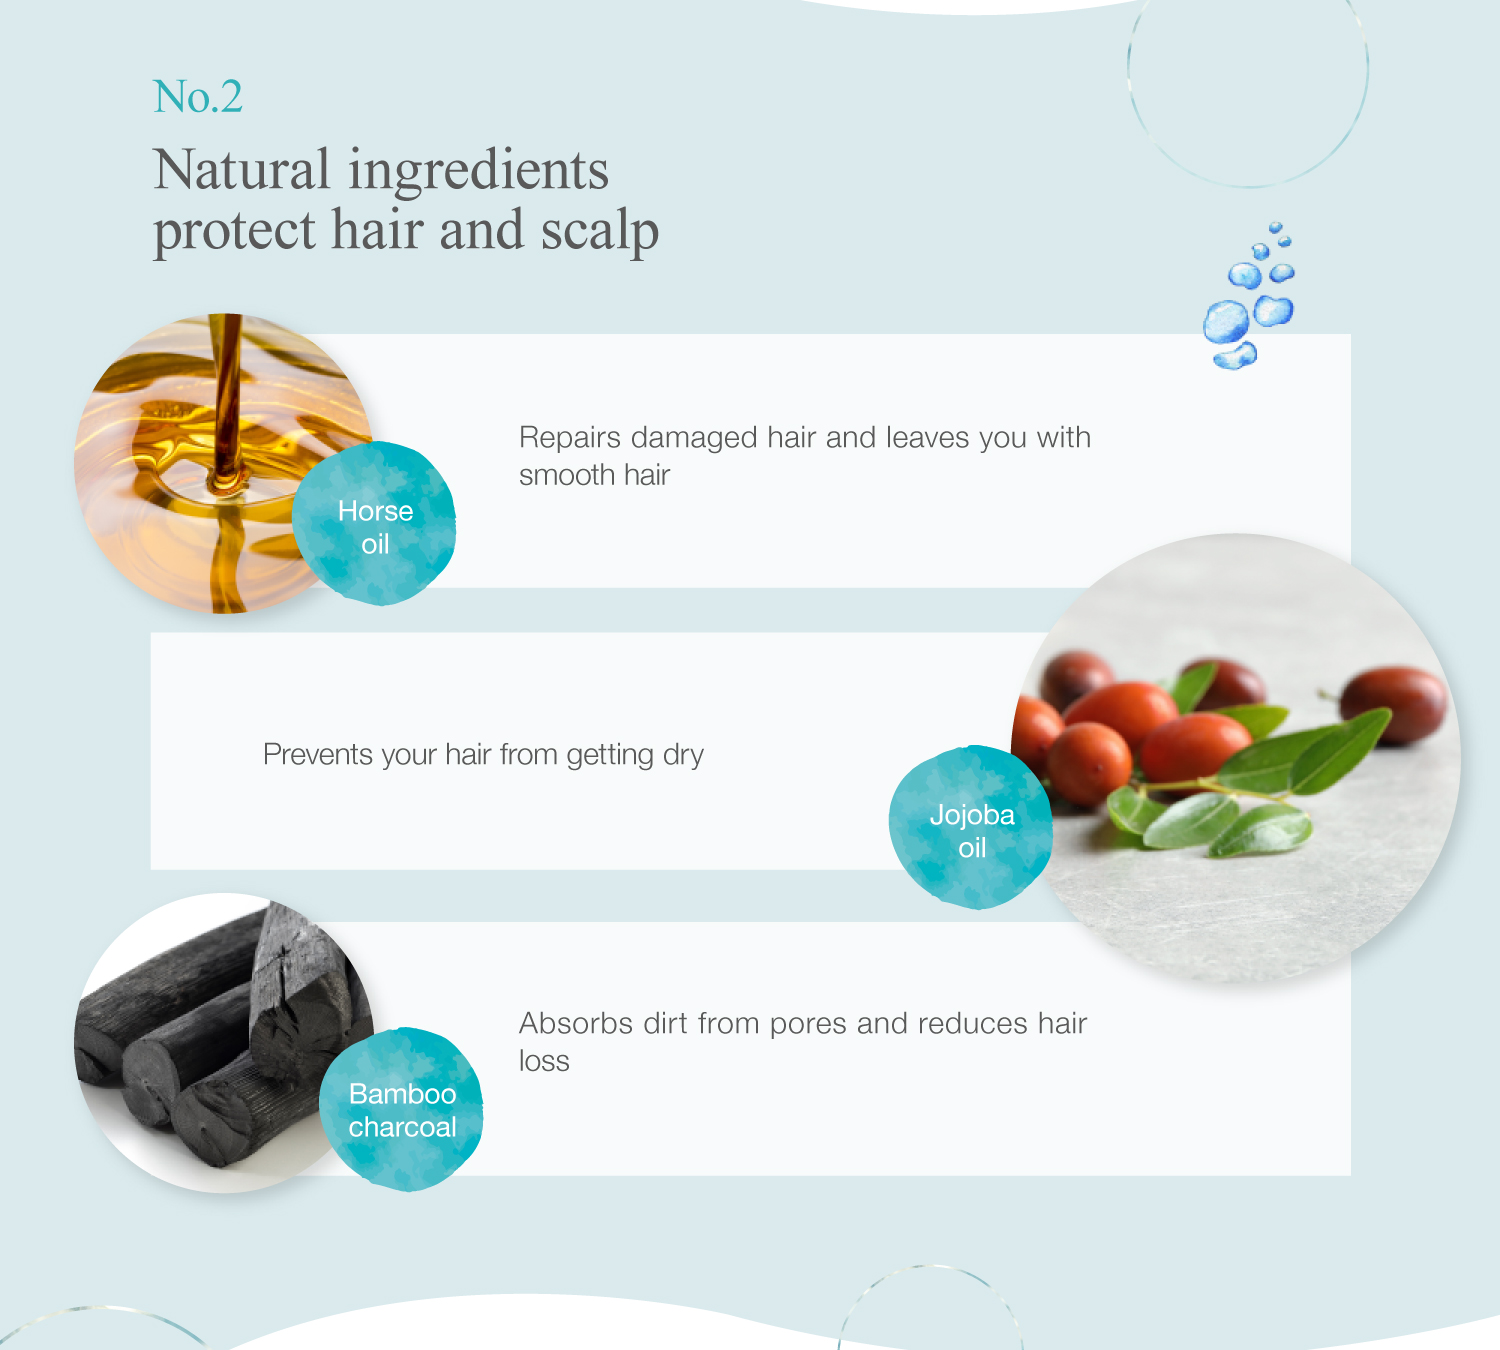 Black sea cucumber shampoo is Natural ingredients protect hair and scalp